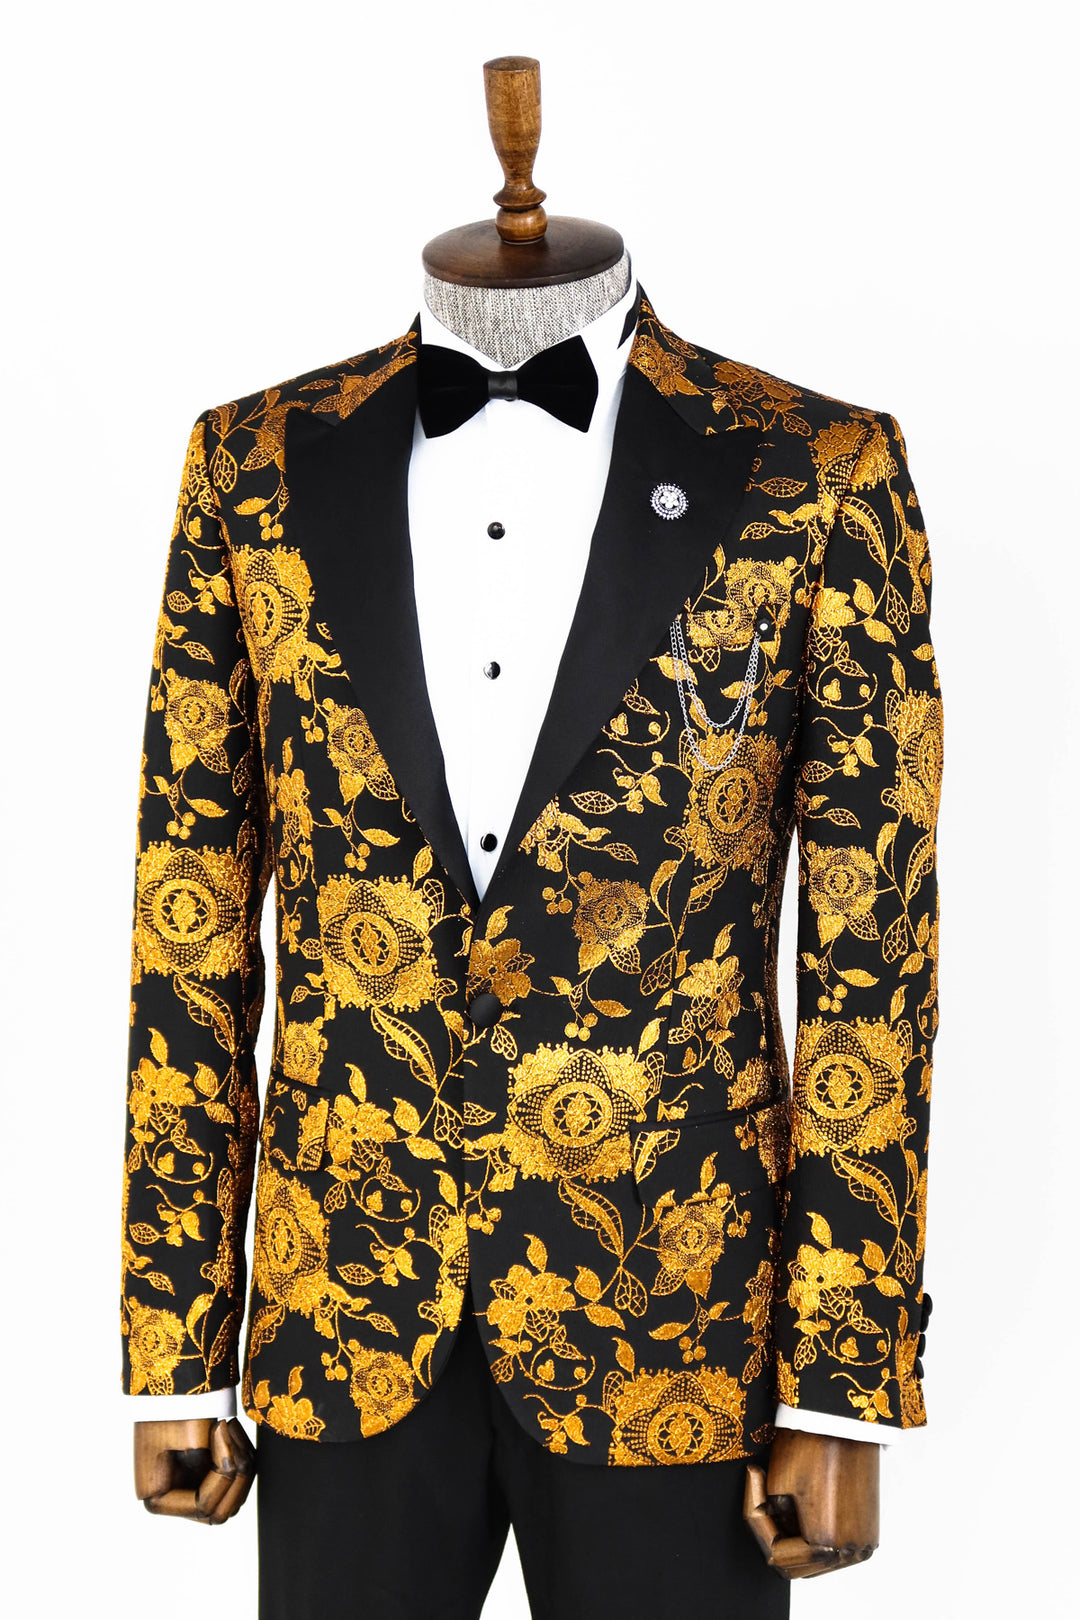 Floral Patterned Slim Fit Yellow Men Prom Blazer - Wessi